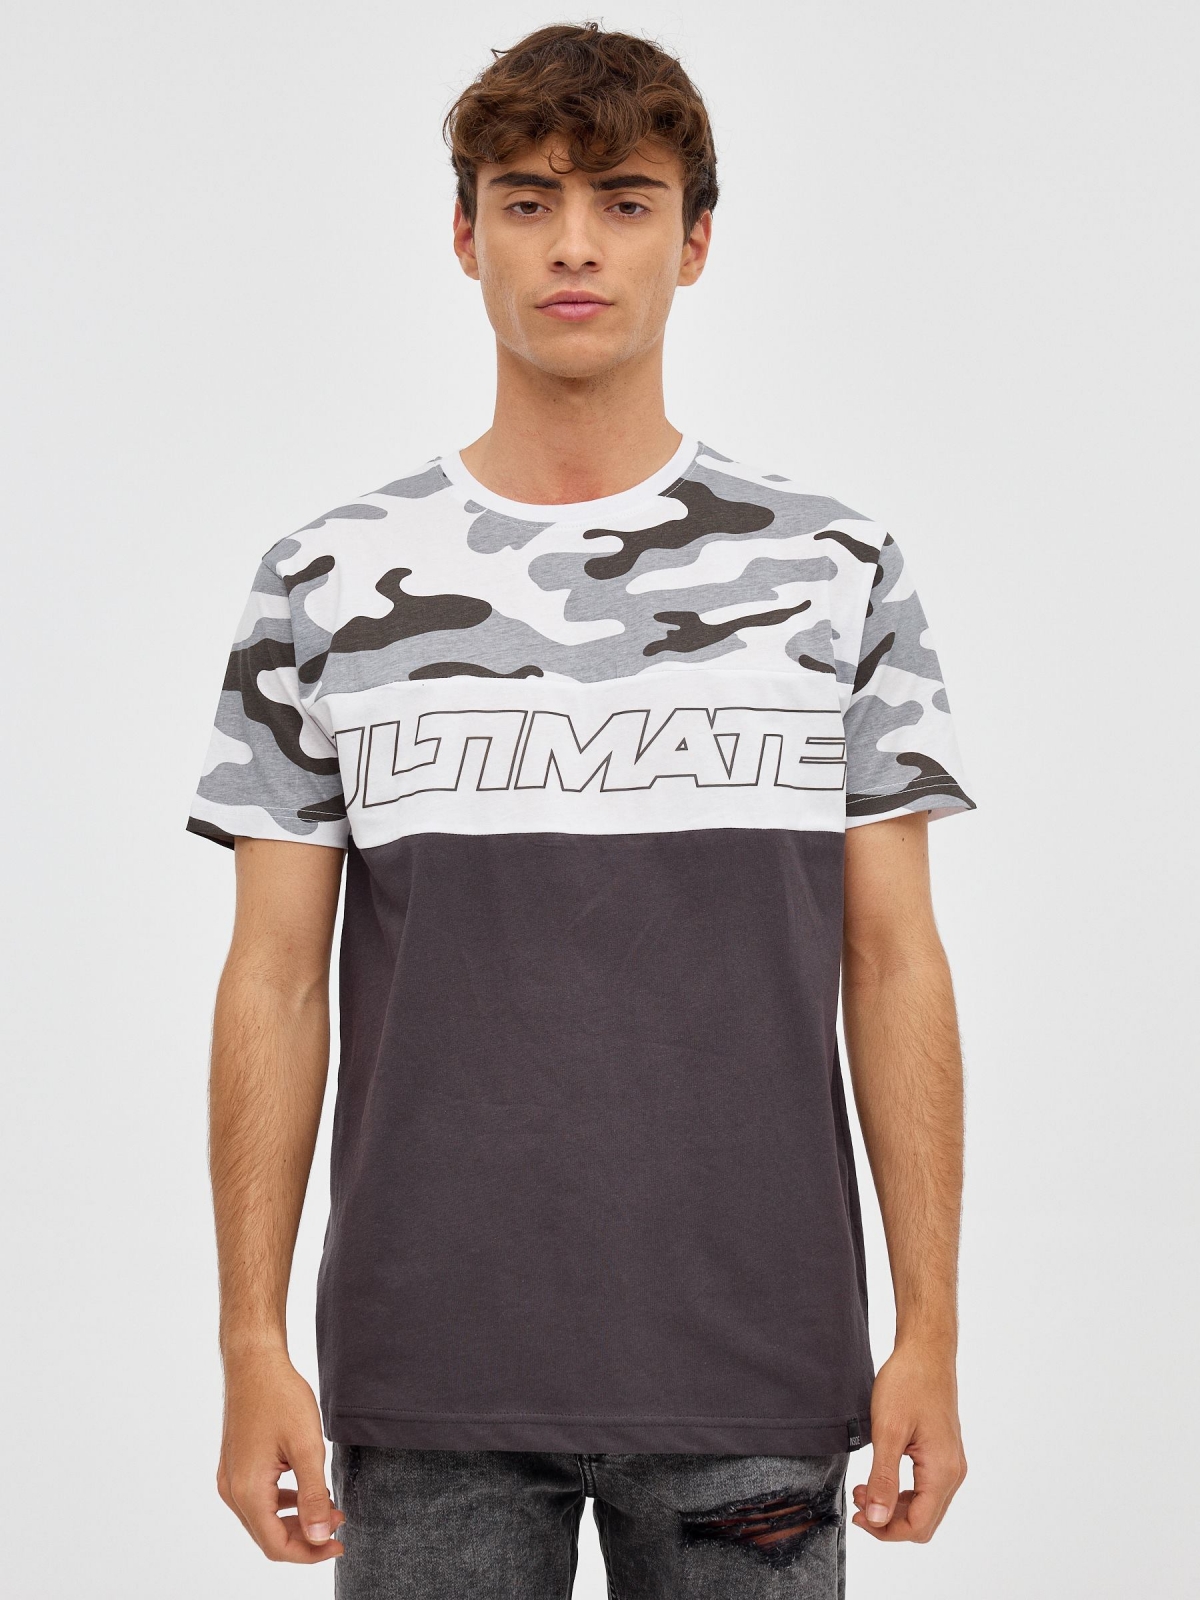 Multi-print T-shirt dark grey middle front view